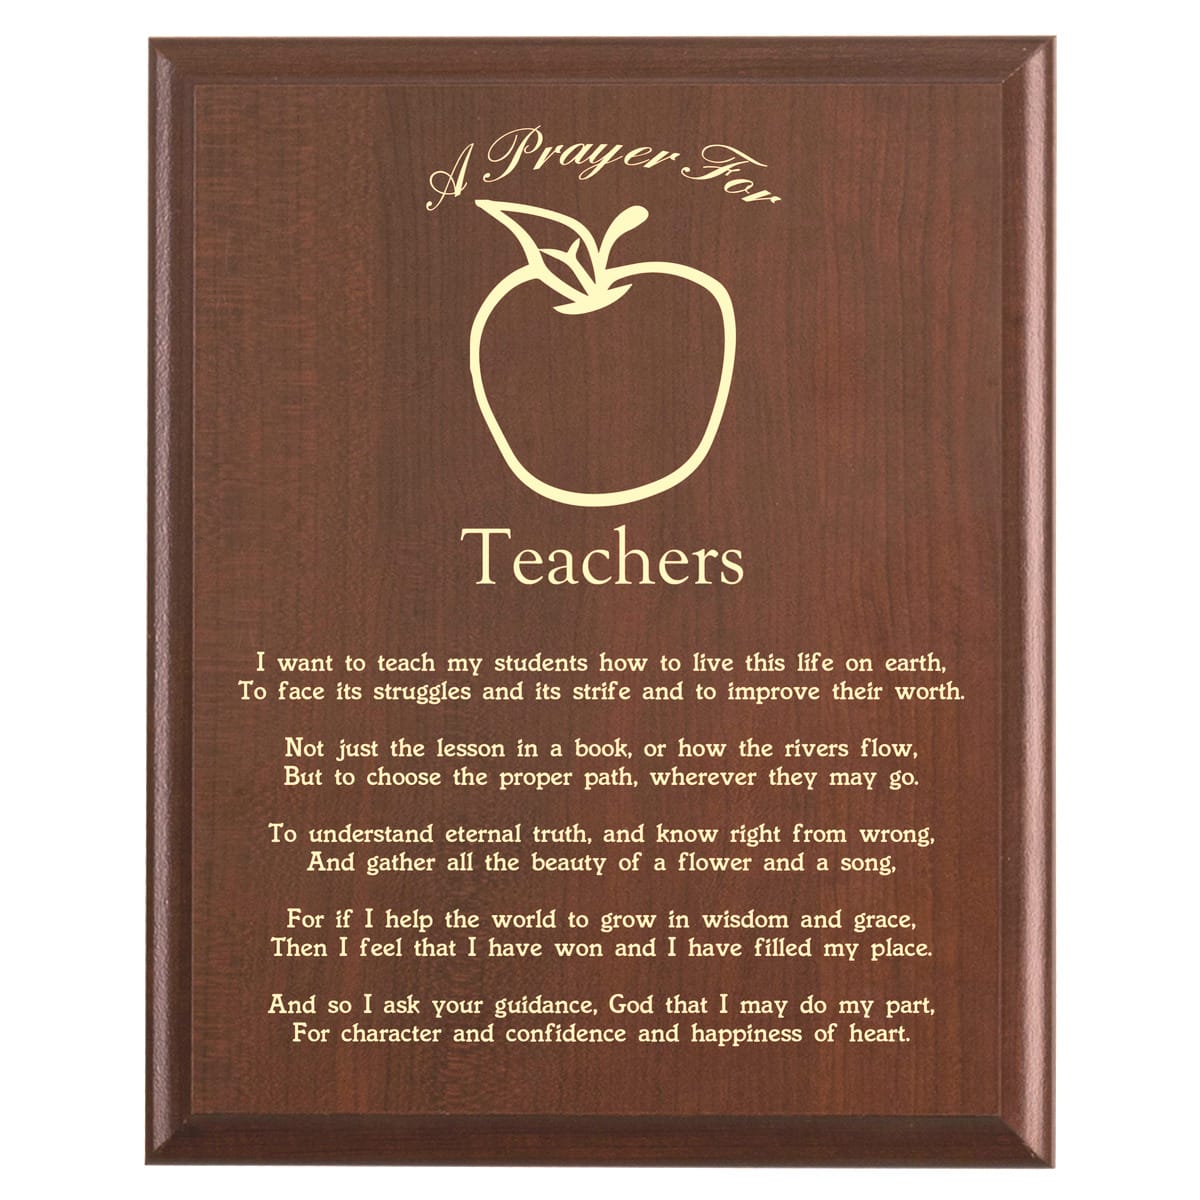 Plaque photo: Teachers Prayer Plaque design with free personalization. Wood style finish with customized text.